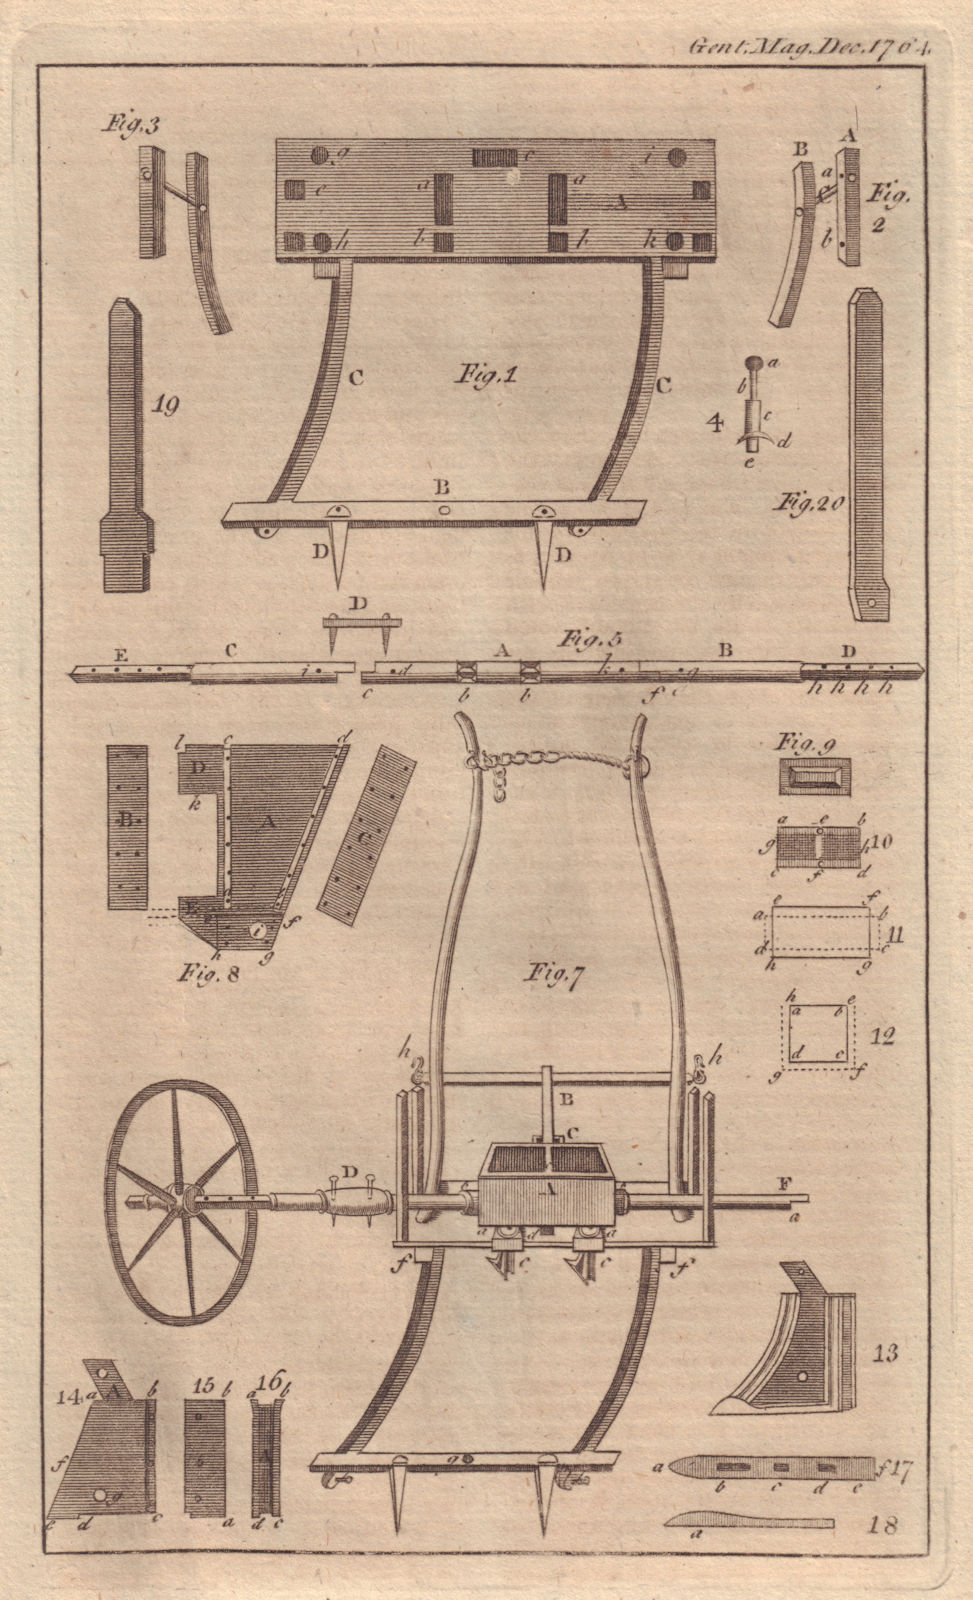 Associate Product The Drill-plough, by Tull. Science. Farming. GENTS MAG 1764 old antique print